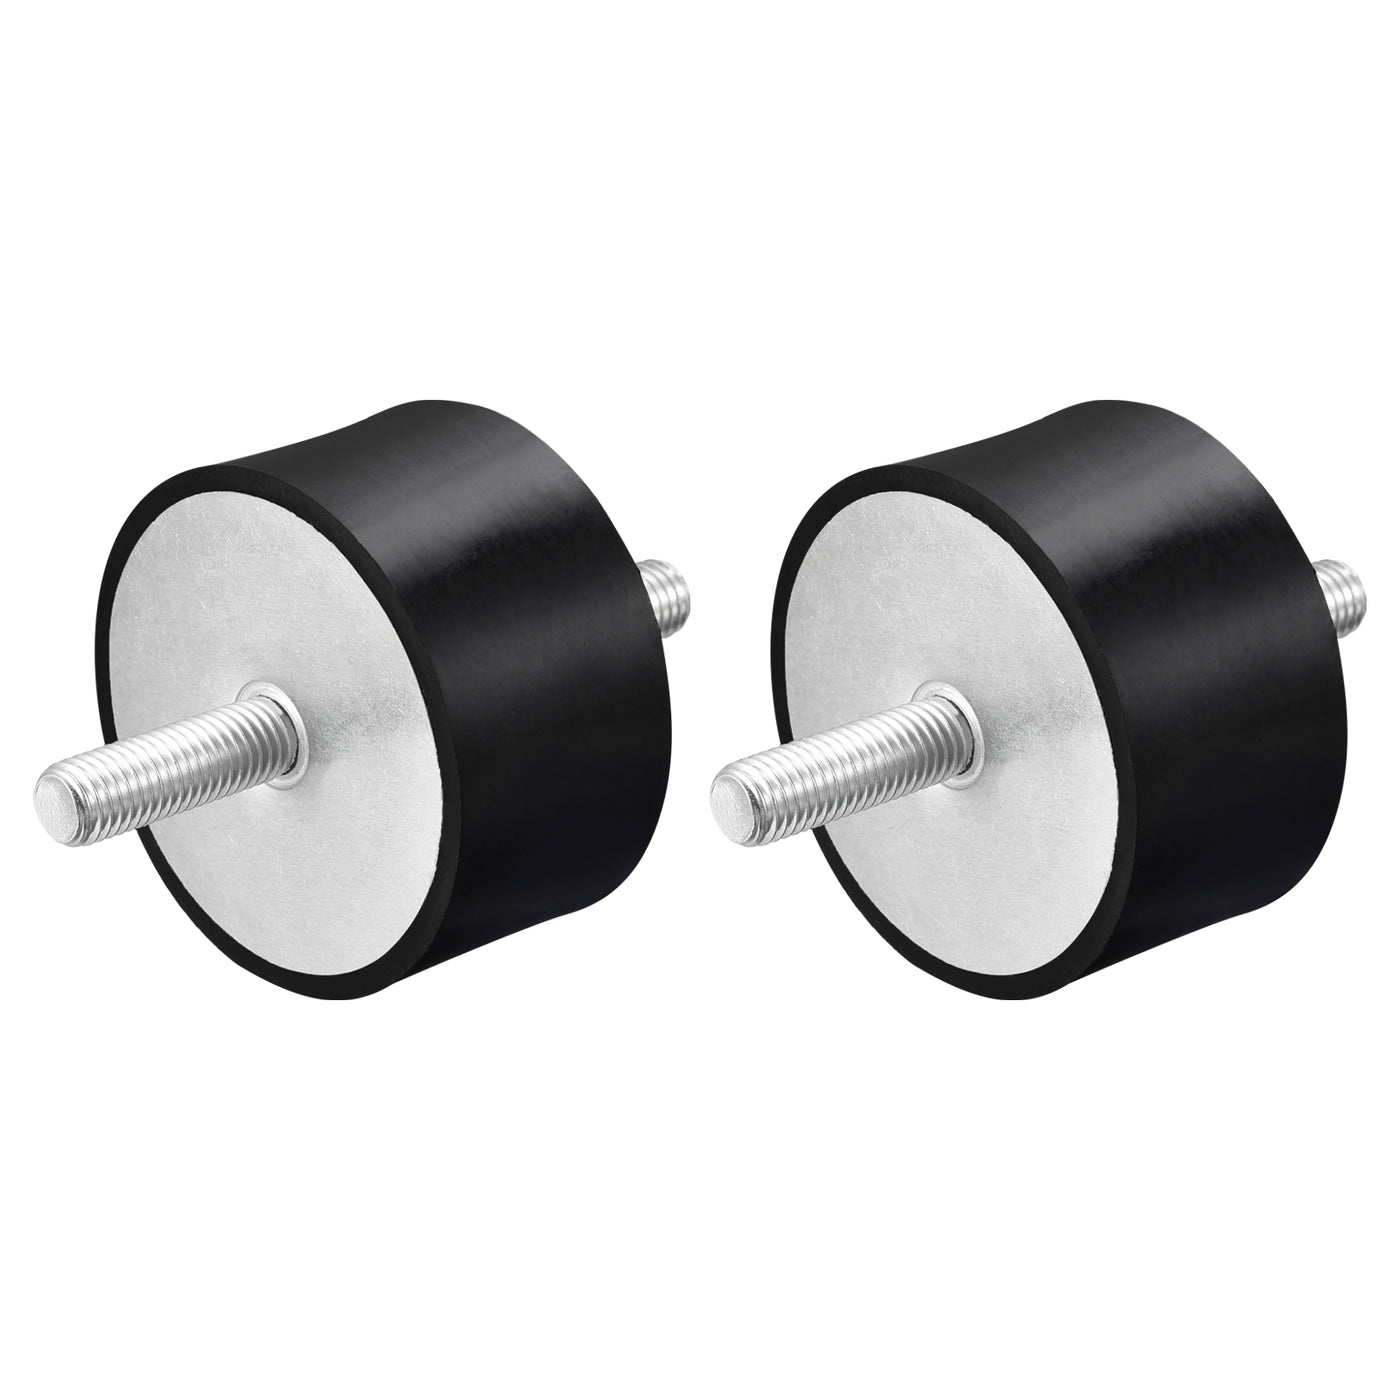 uxcell Uxcell Rubber Mounts 2pcs M12x37mm Male Vibration Isolator Shock Absorber D75mmxH40mm